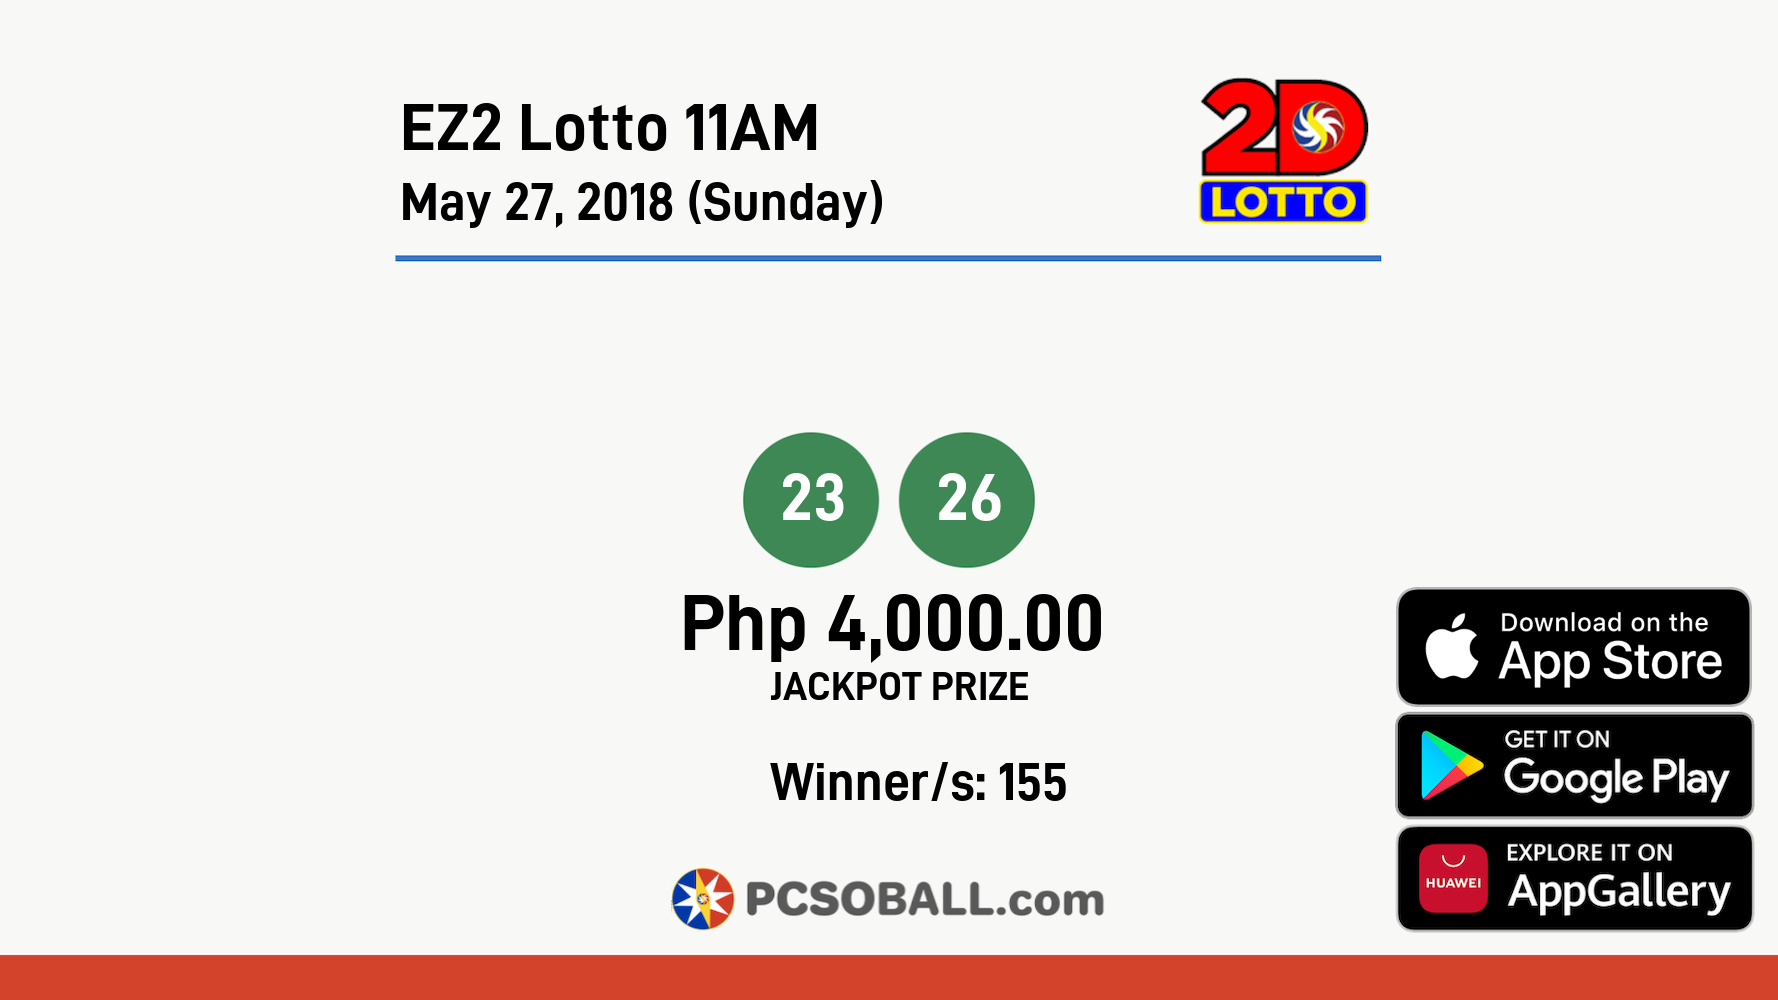 EZ2 Lotto 11AM May 27, 2018 (Sunday) Result